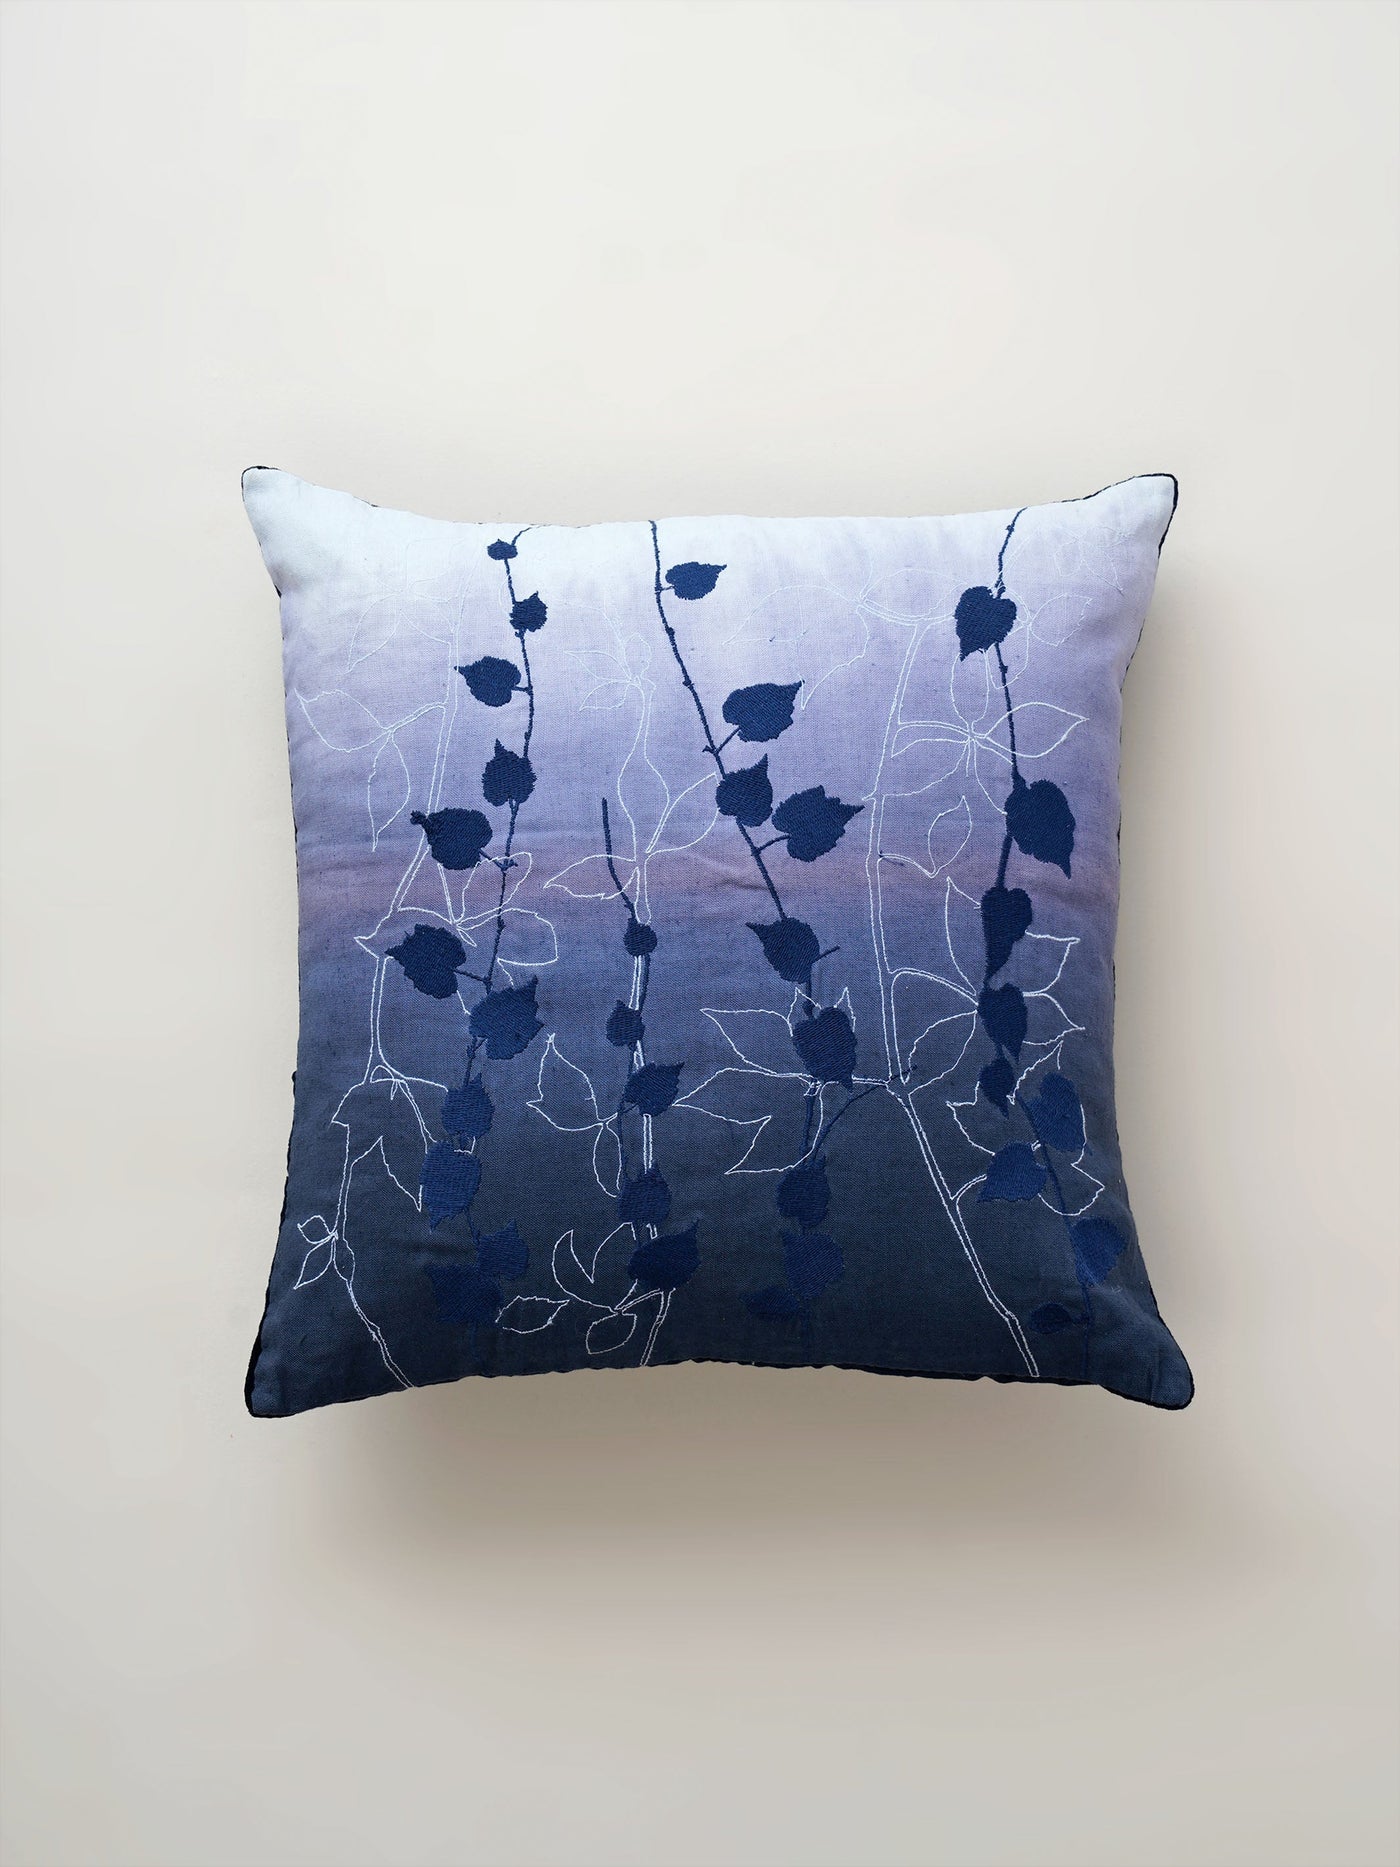 Cushion Cover - Blue Ombre Embroidered